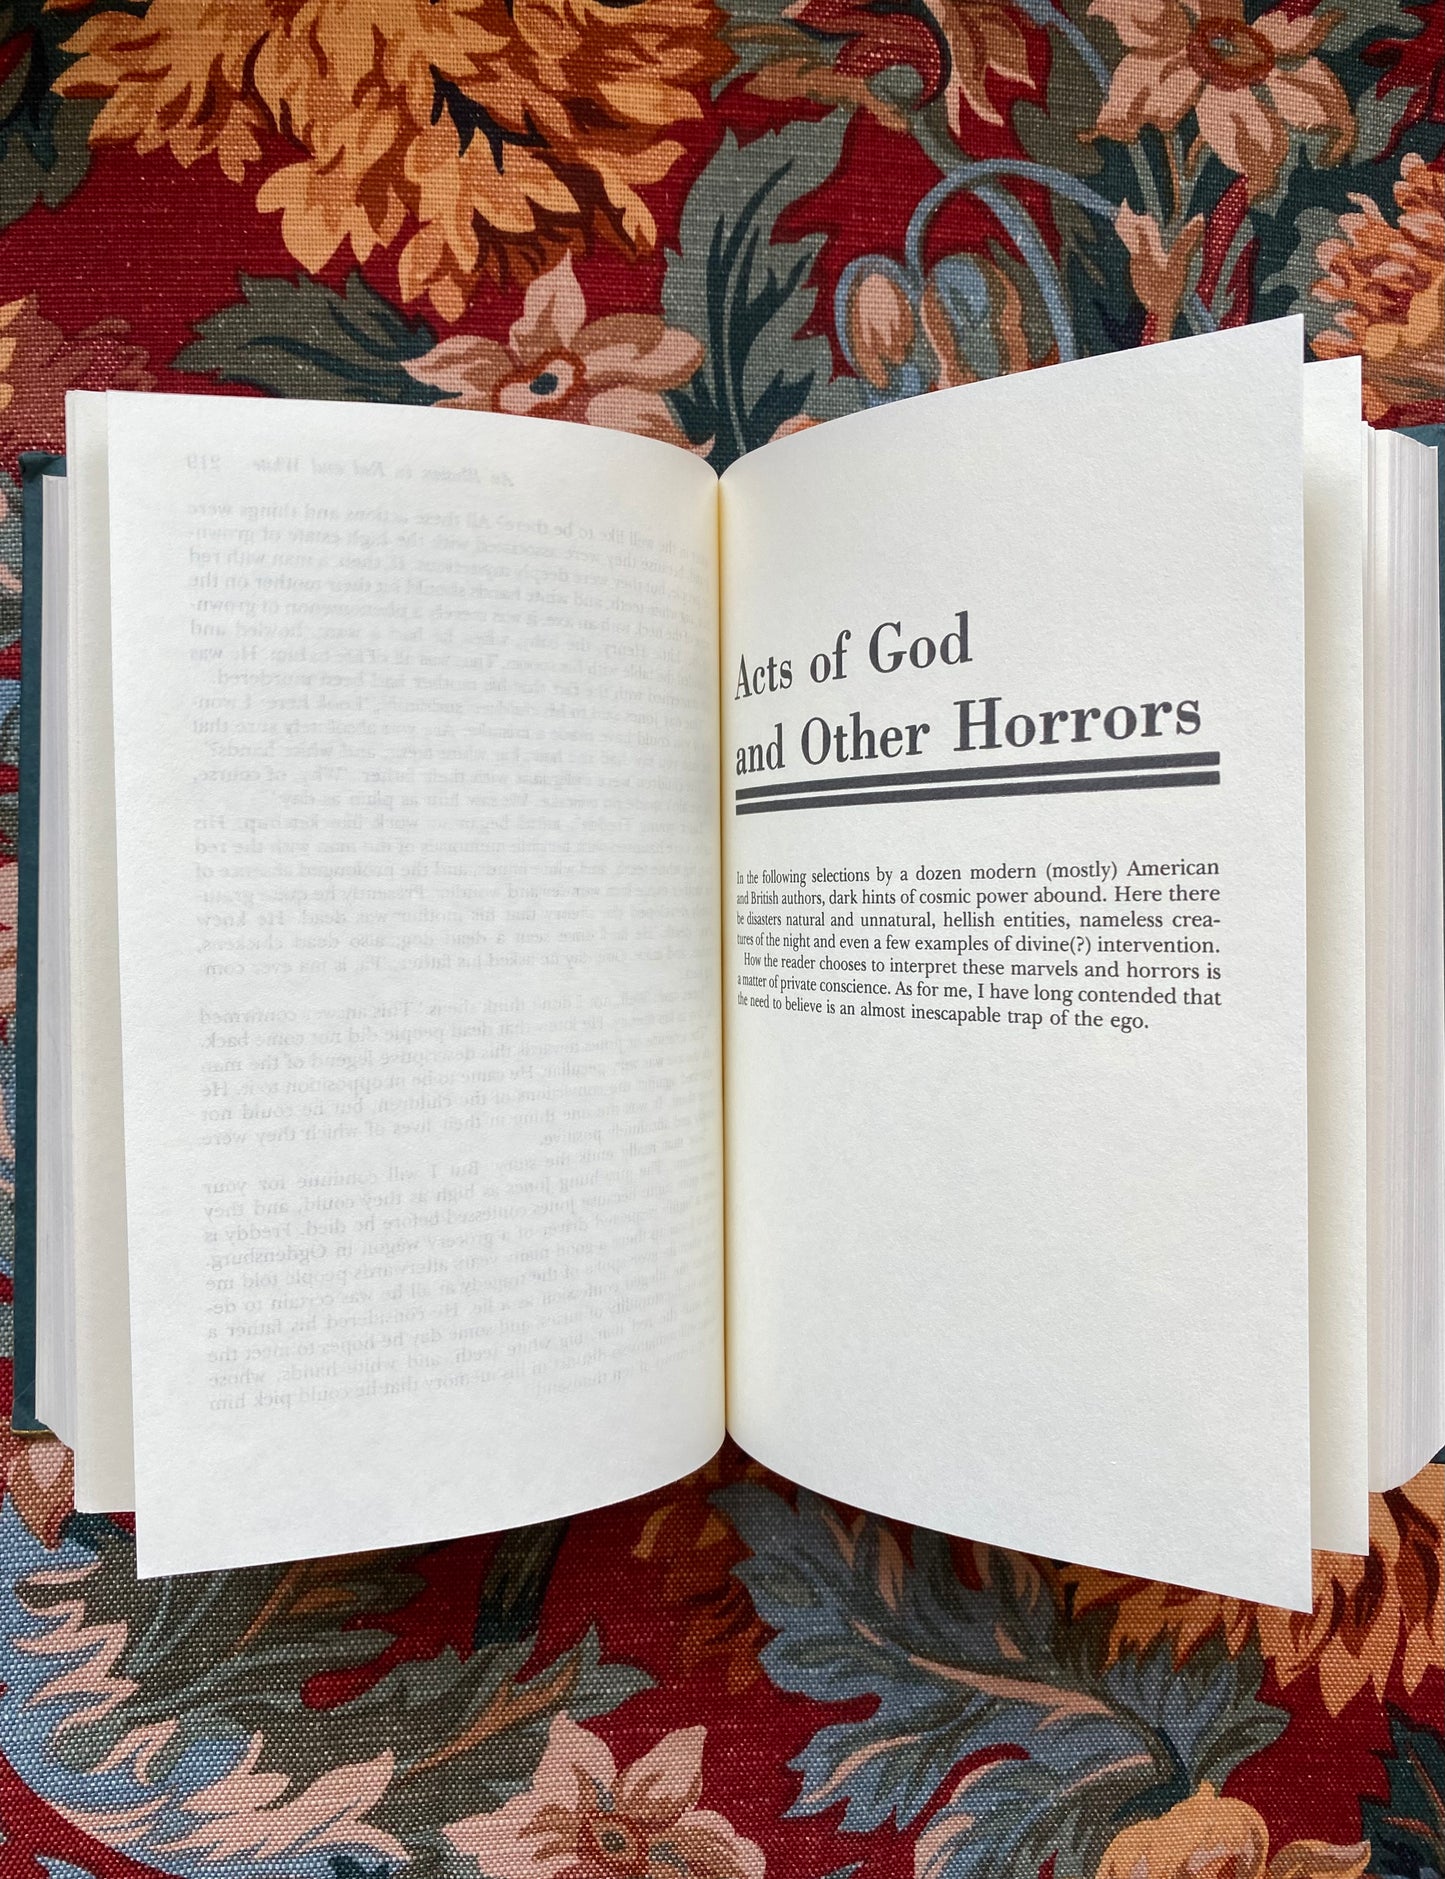 Hand Painted, One of a Kind Book Art- Masterpieces of Terror